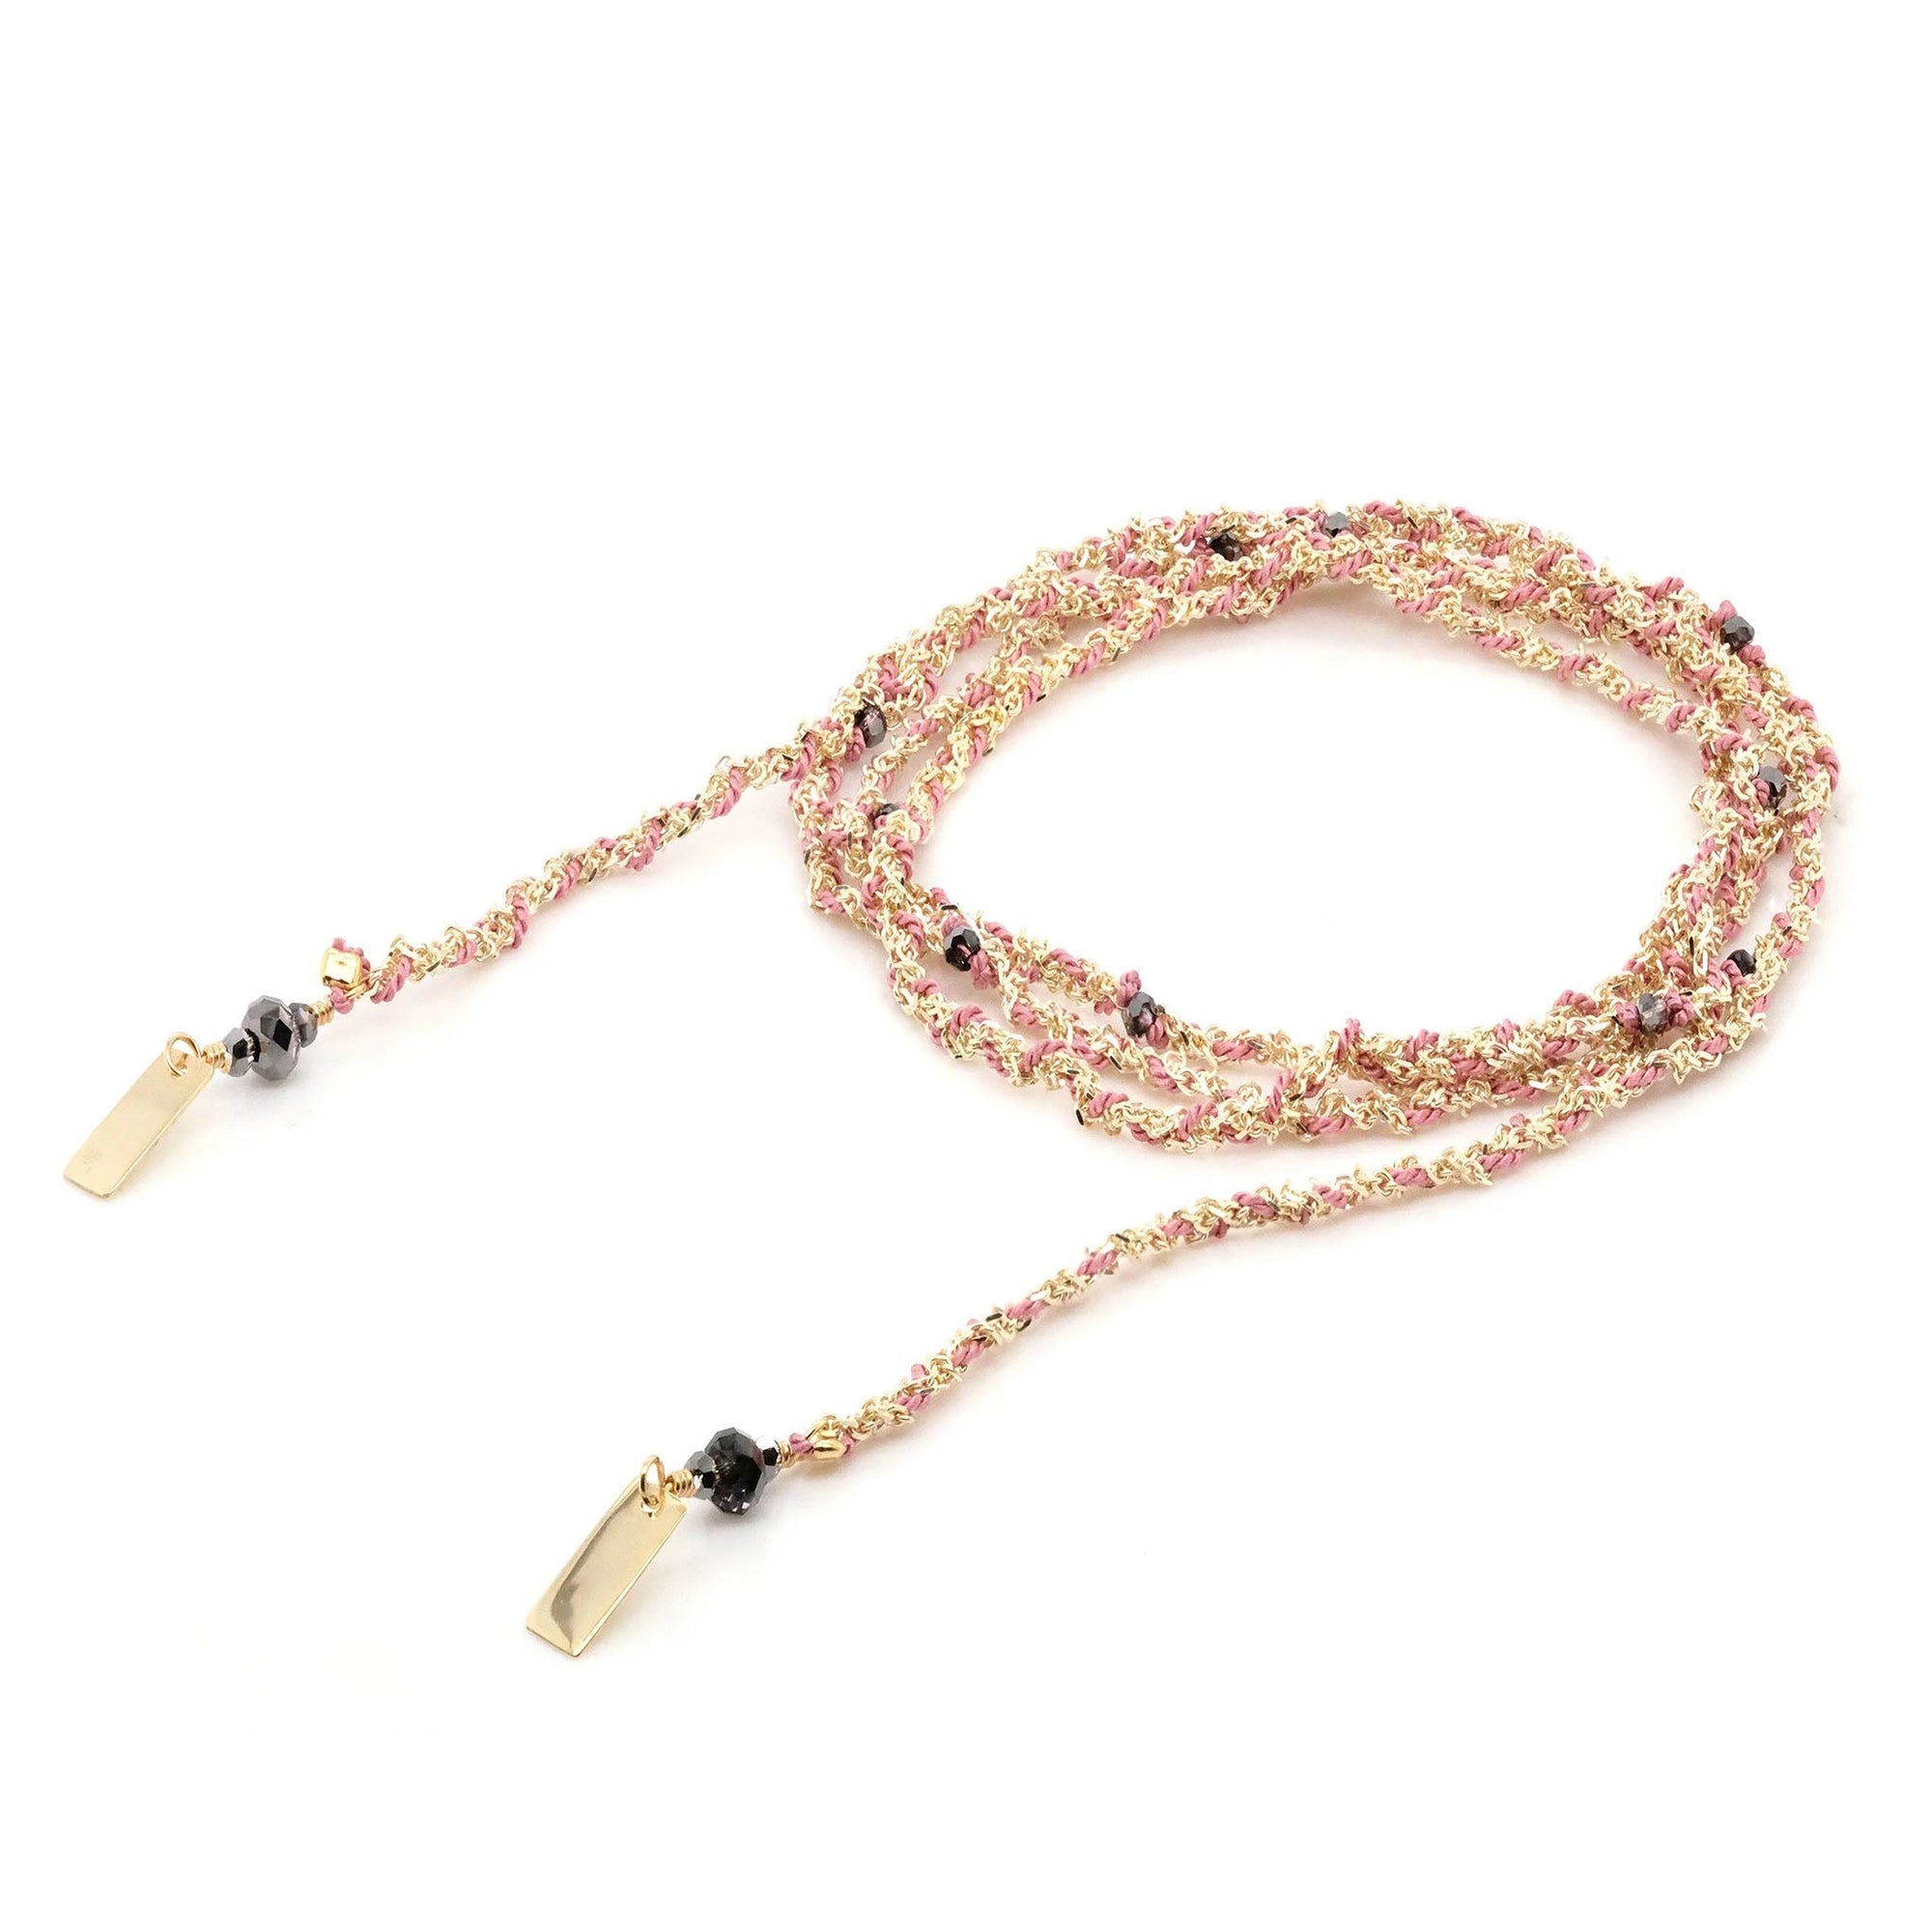 Gold Vermeil Chain and Pink Silk Woven Wrap - Peridot Fine Jewelry - Marie Laure Chamorel